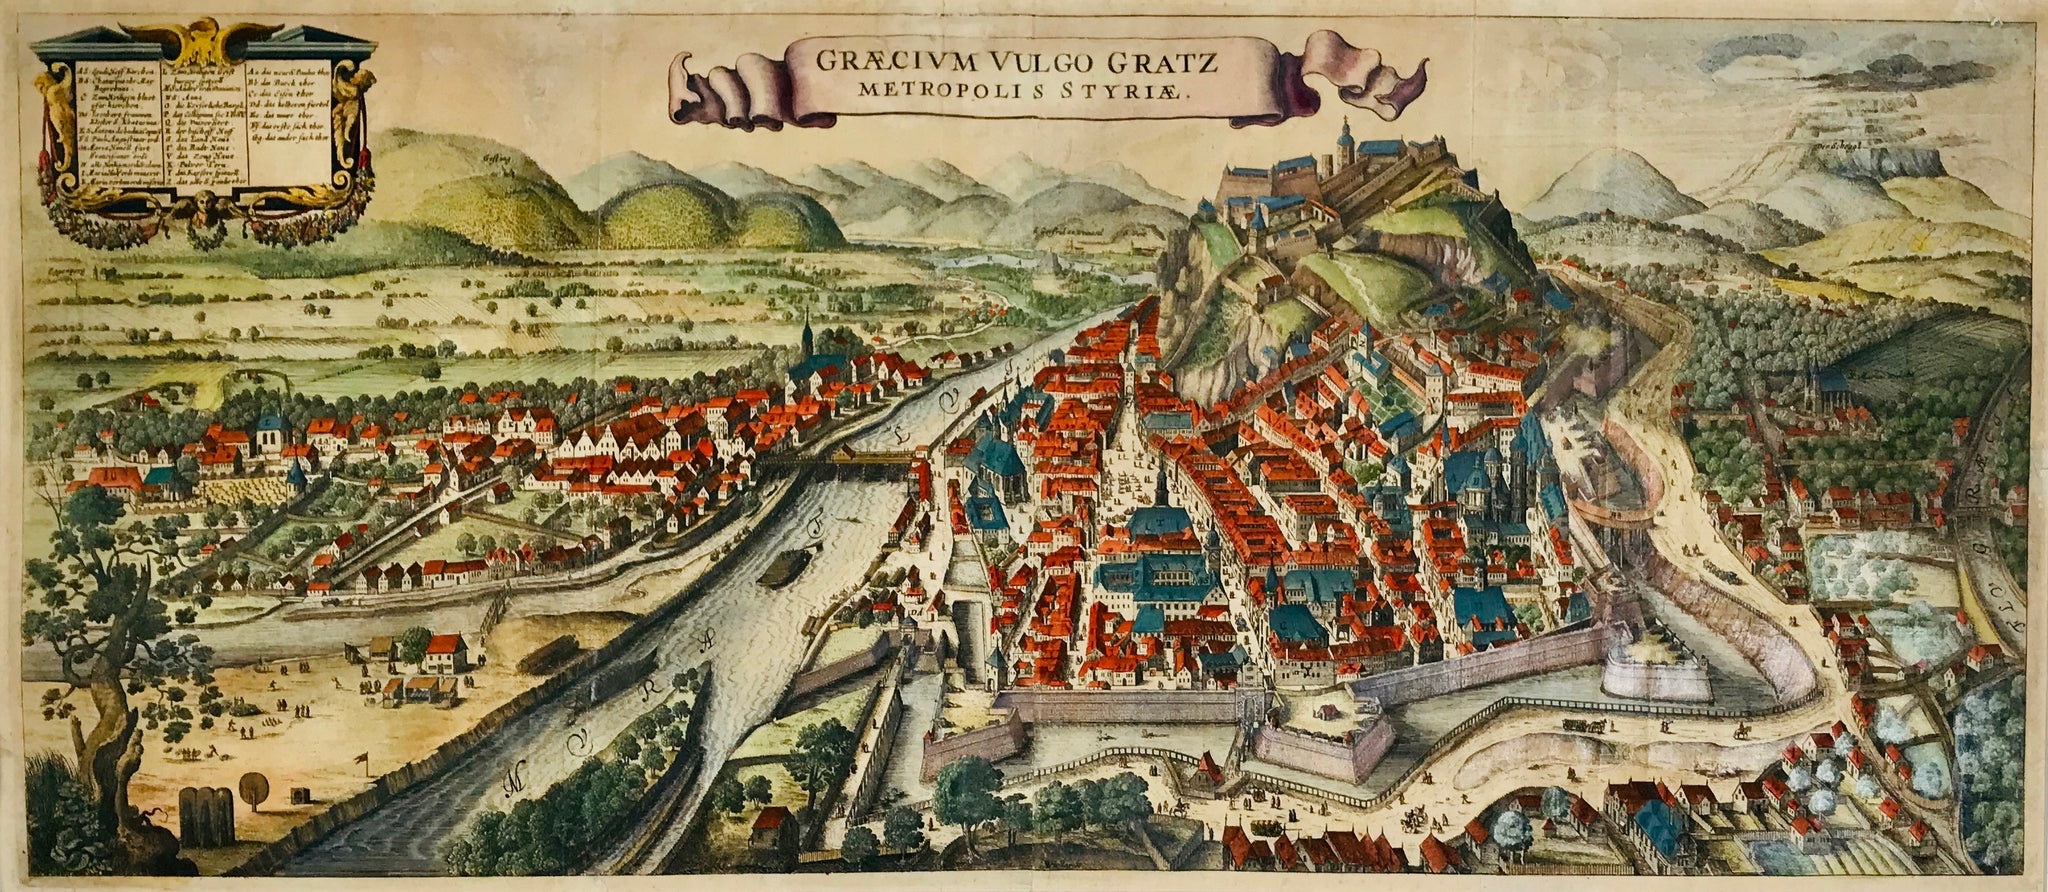 "Graecium vulgo Gratz Metropolis Styriae". City of Graz.  Copper etching by Laurenz van de Sype (died in Graz 1634). Finished after van de Sype's death by Wenzel Hollar (1607 Prague - London 1777). Original hand coloring. Published ca. 1635/40.  Amazingly beautiful general bird's eye view of Graz. Van de Sype was a Dutch architect and copper etcher, working and living in Graz. It is obvious that his etching of Graz was a pure declaration of love!